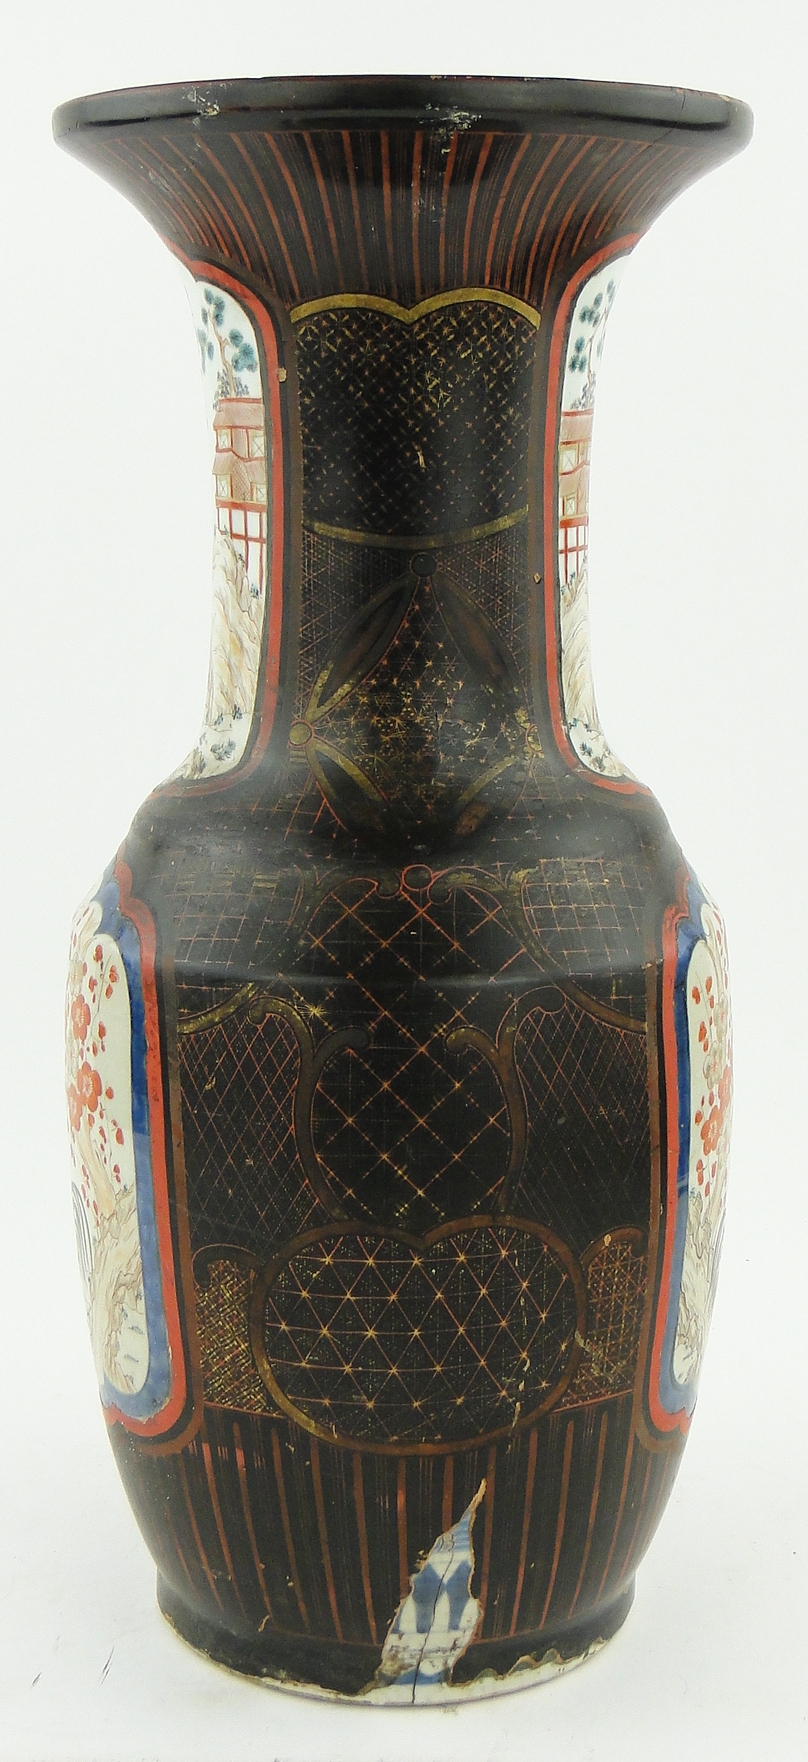 18/19th century Chinese vase
with lacquer and hatch gilded ground covering blue and white - Image 4 of 10